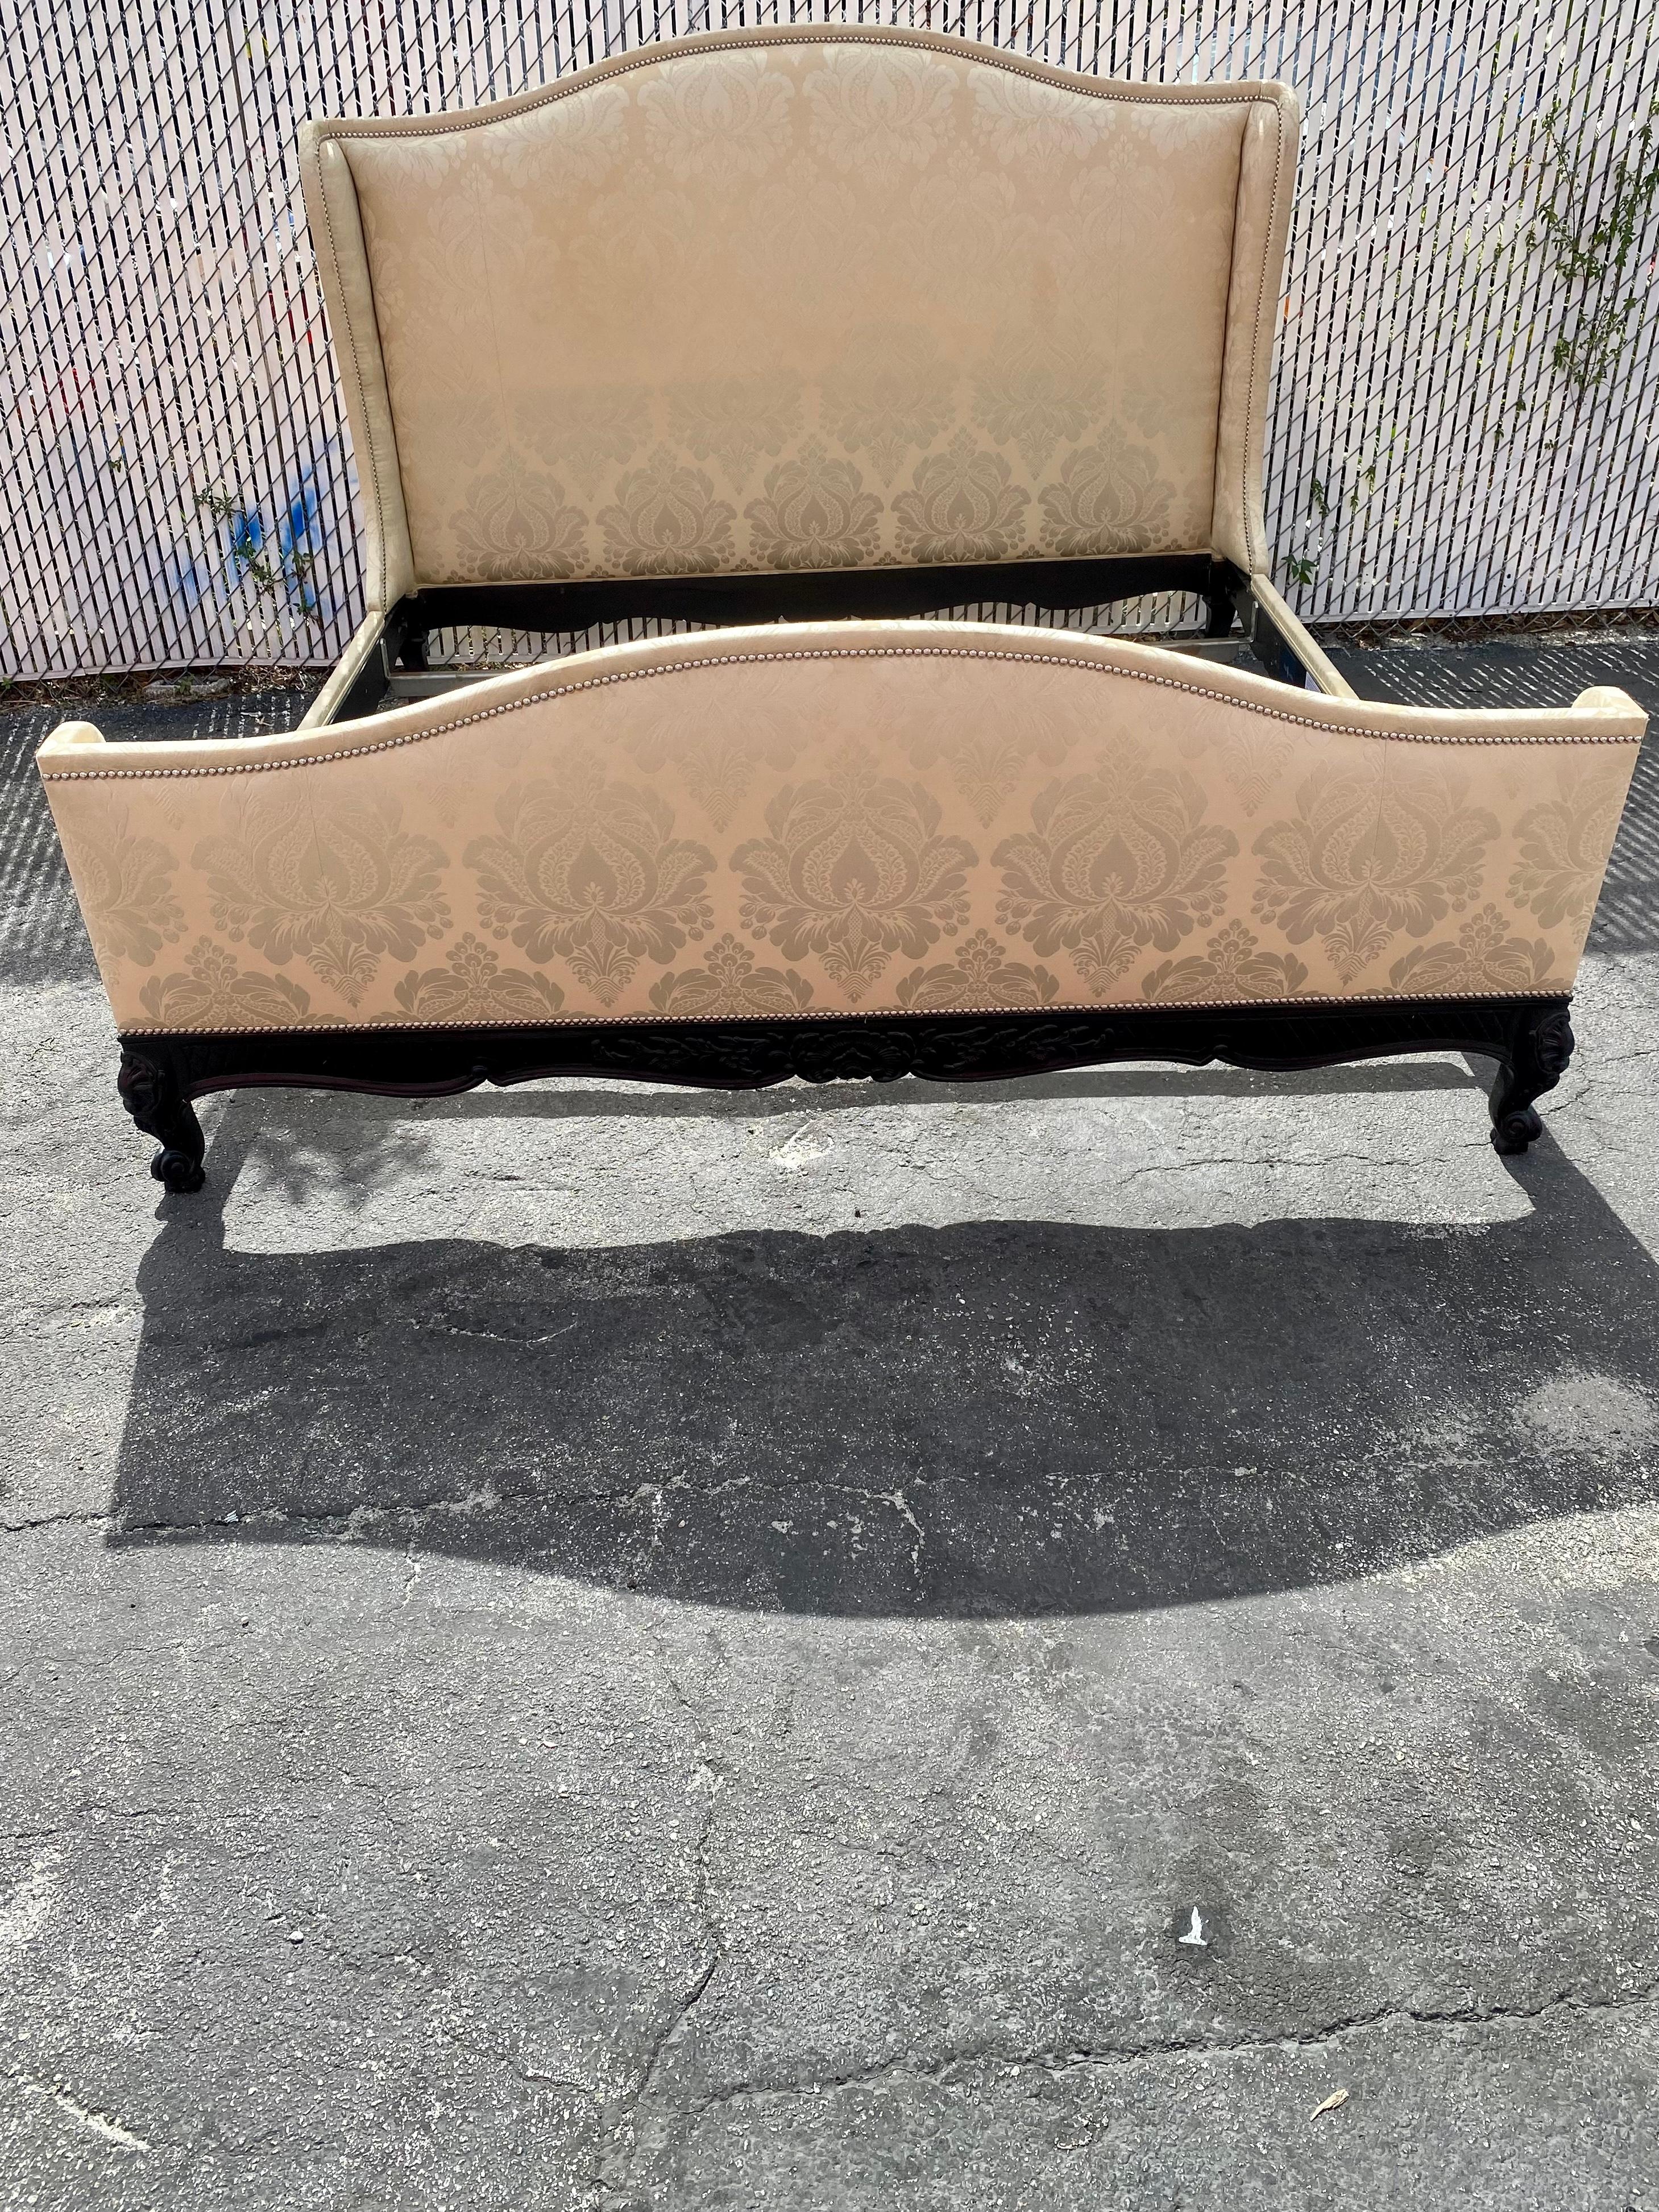 On offer on this occasion is one of the most stunning, Ralph Lauren Damask bed frame you could hope to find. Outstanding design is exhibited throughout. The beautiful bed frame with ebony hand carved wood and nailhead is statement piece and packed